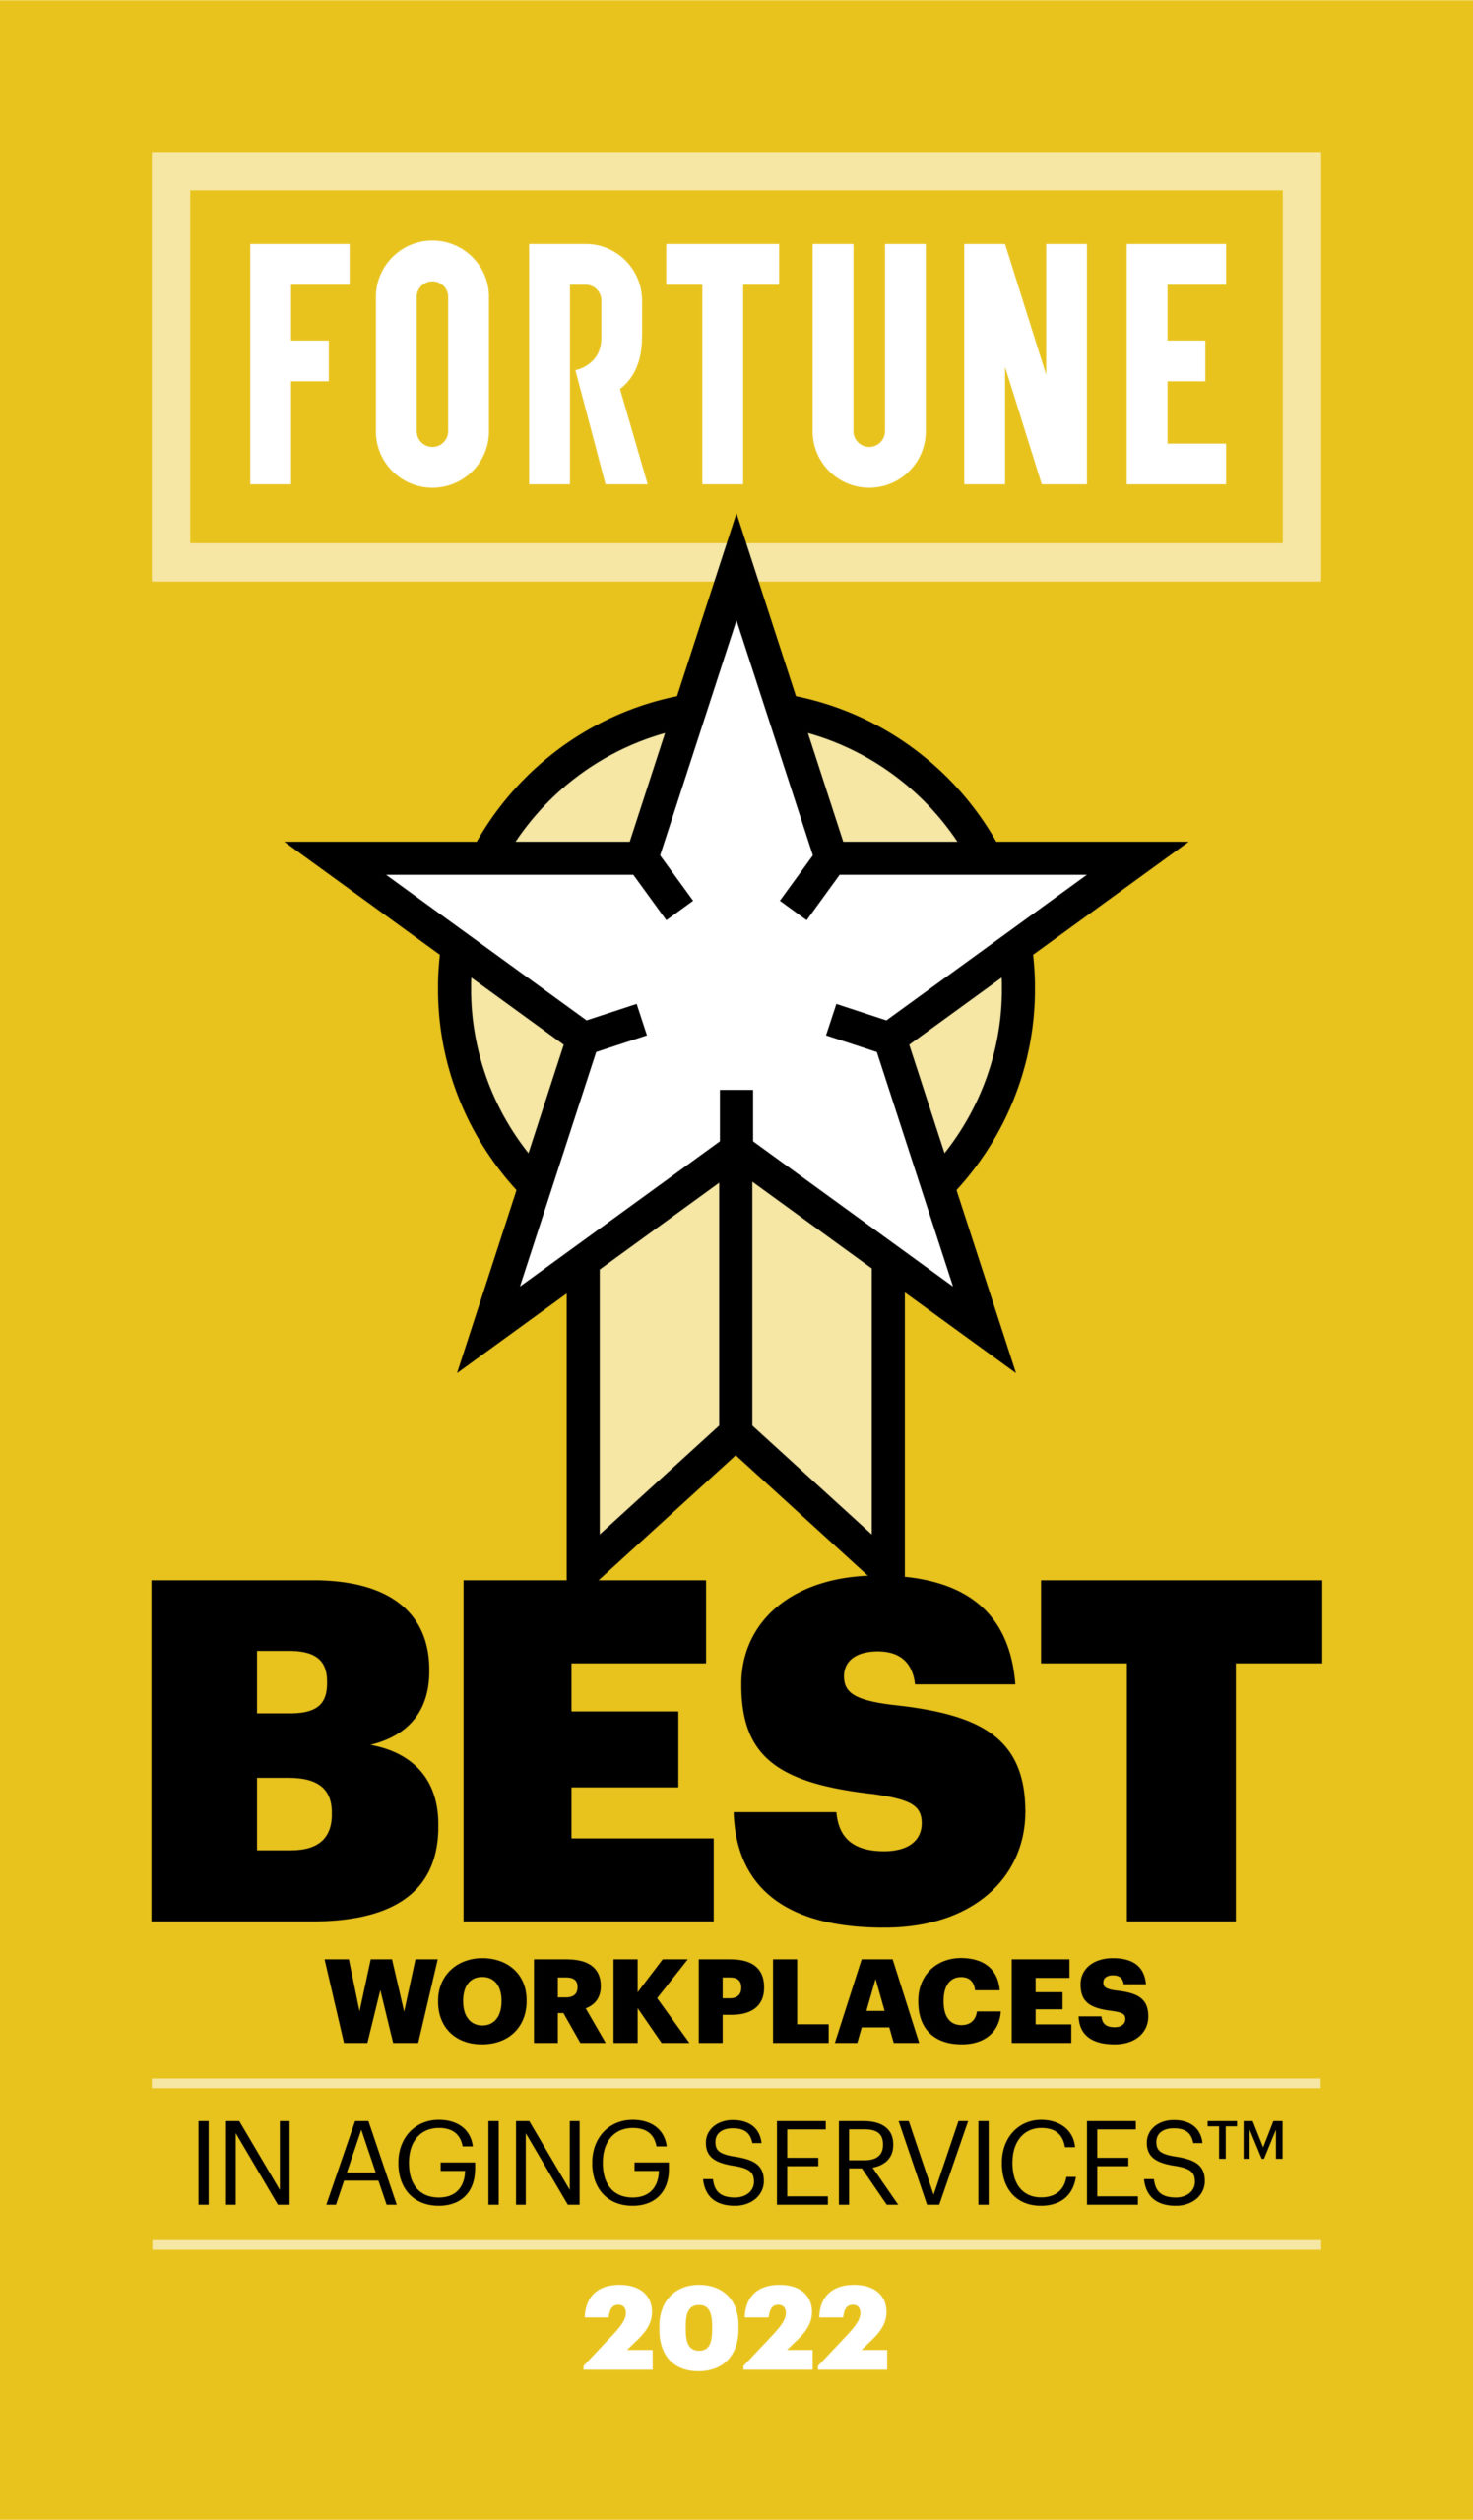 Fortune Best Workplaces in Aging Services Award